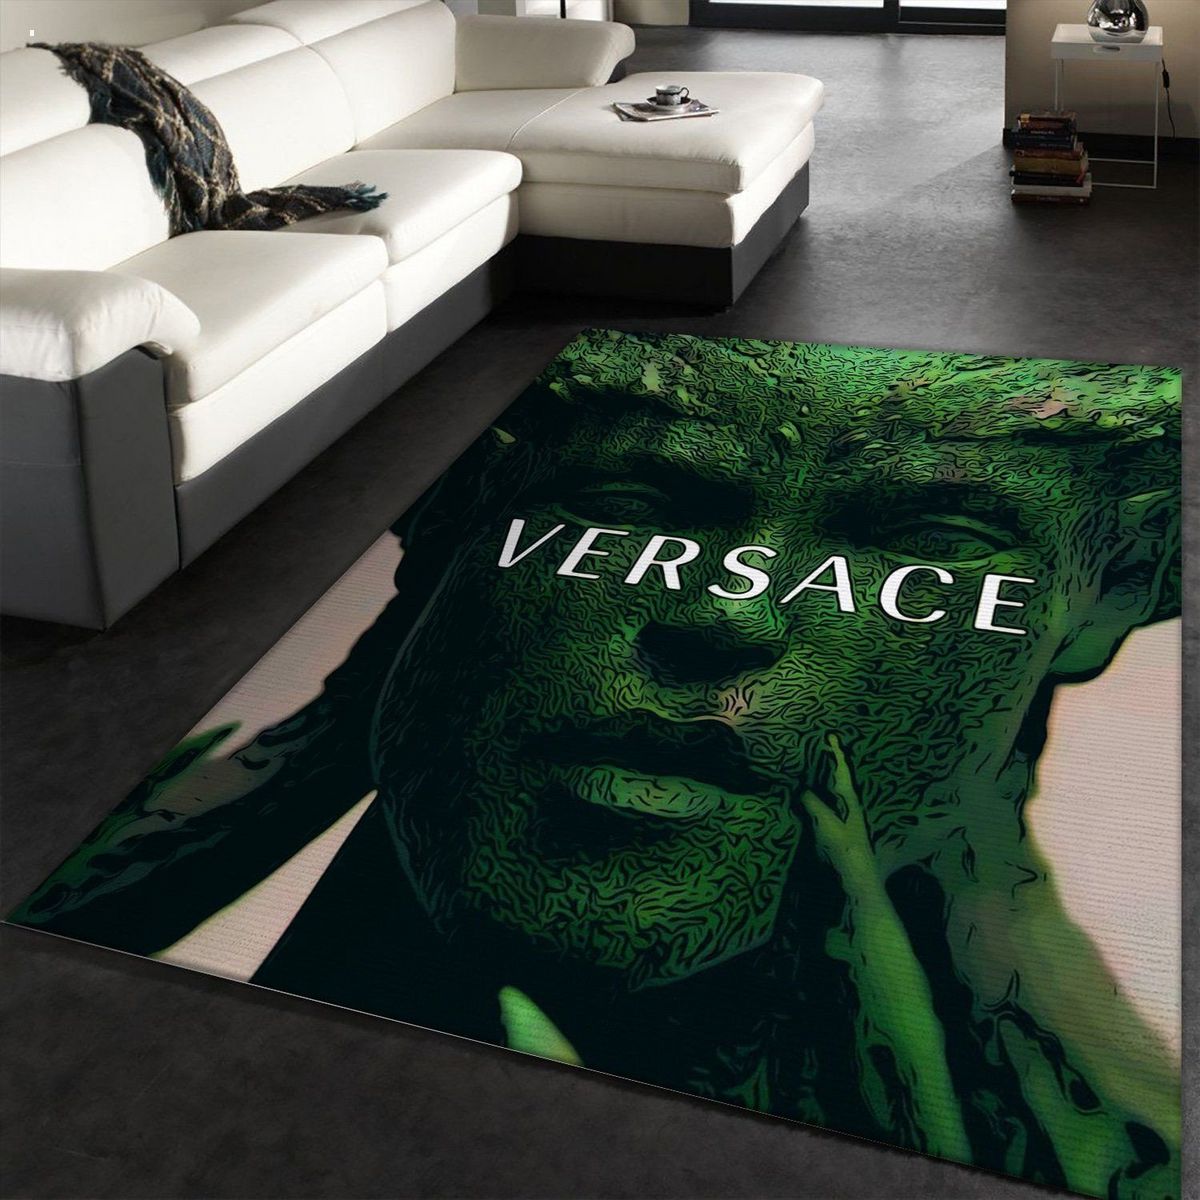 Versace Green 3D Printing Luxury Brand Carpet Rug Limited Edition